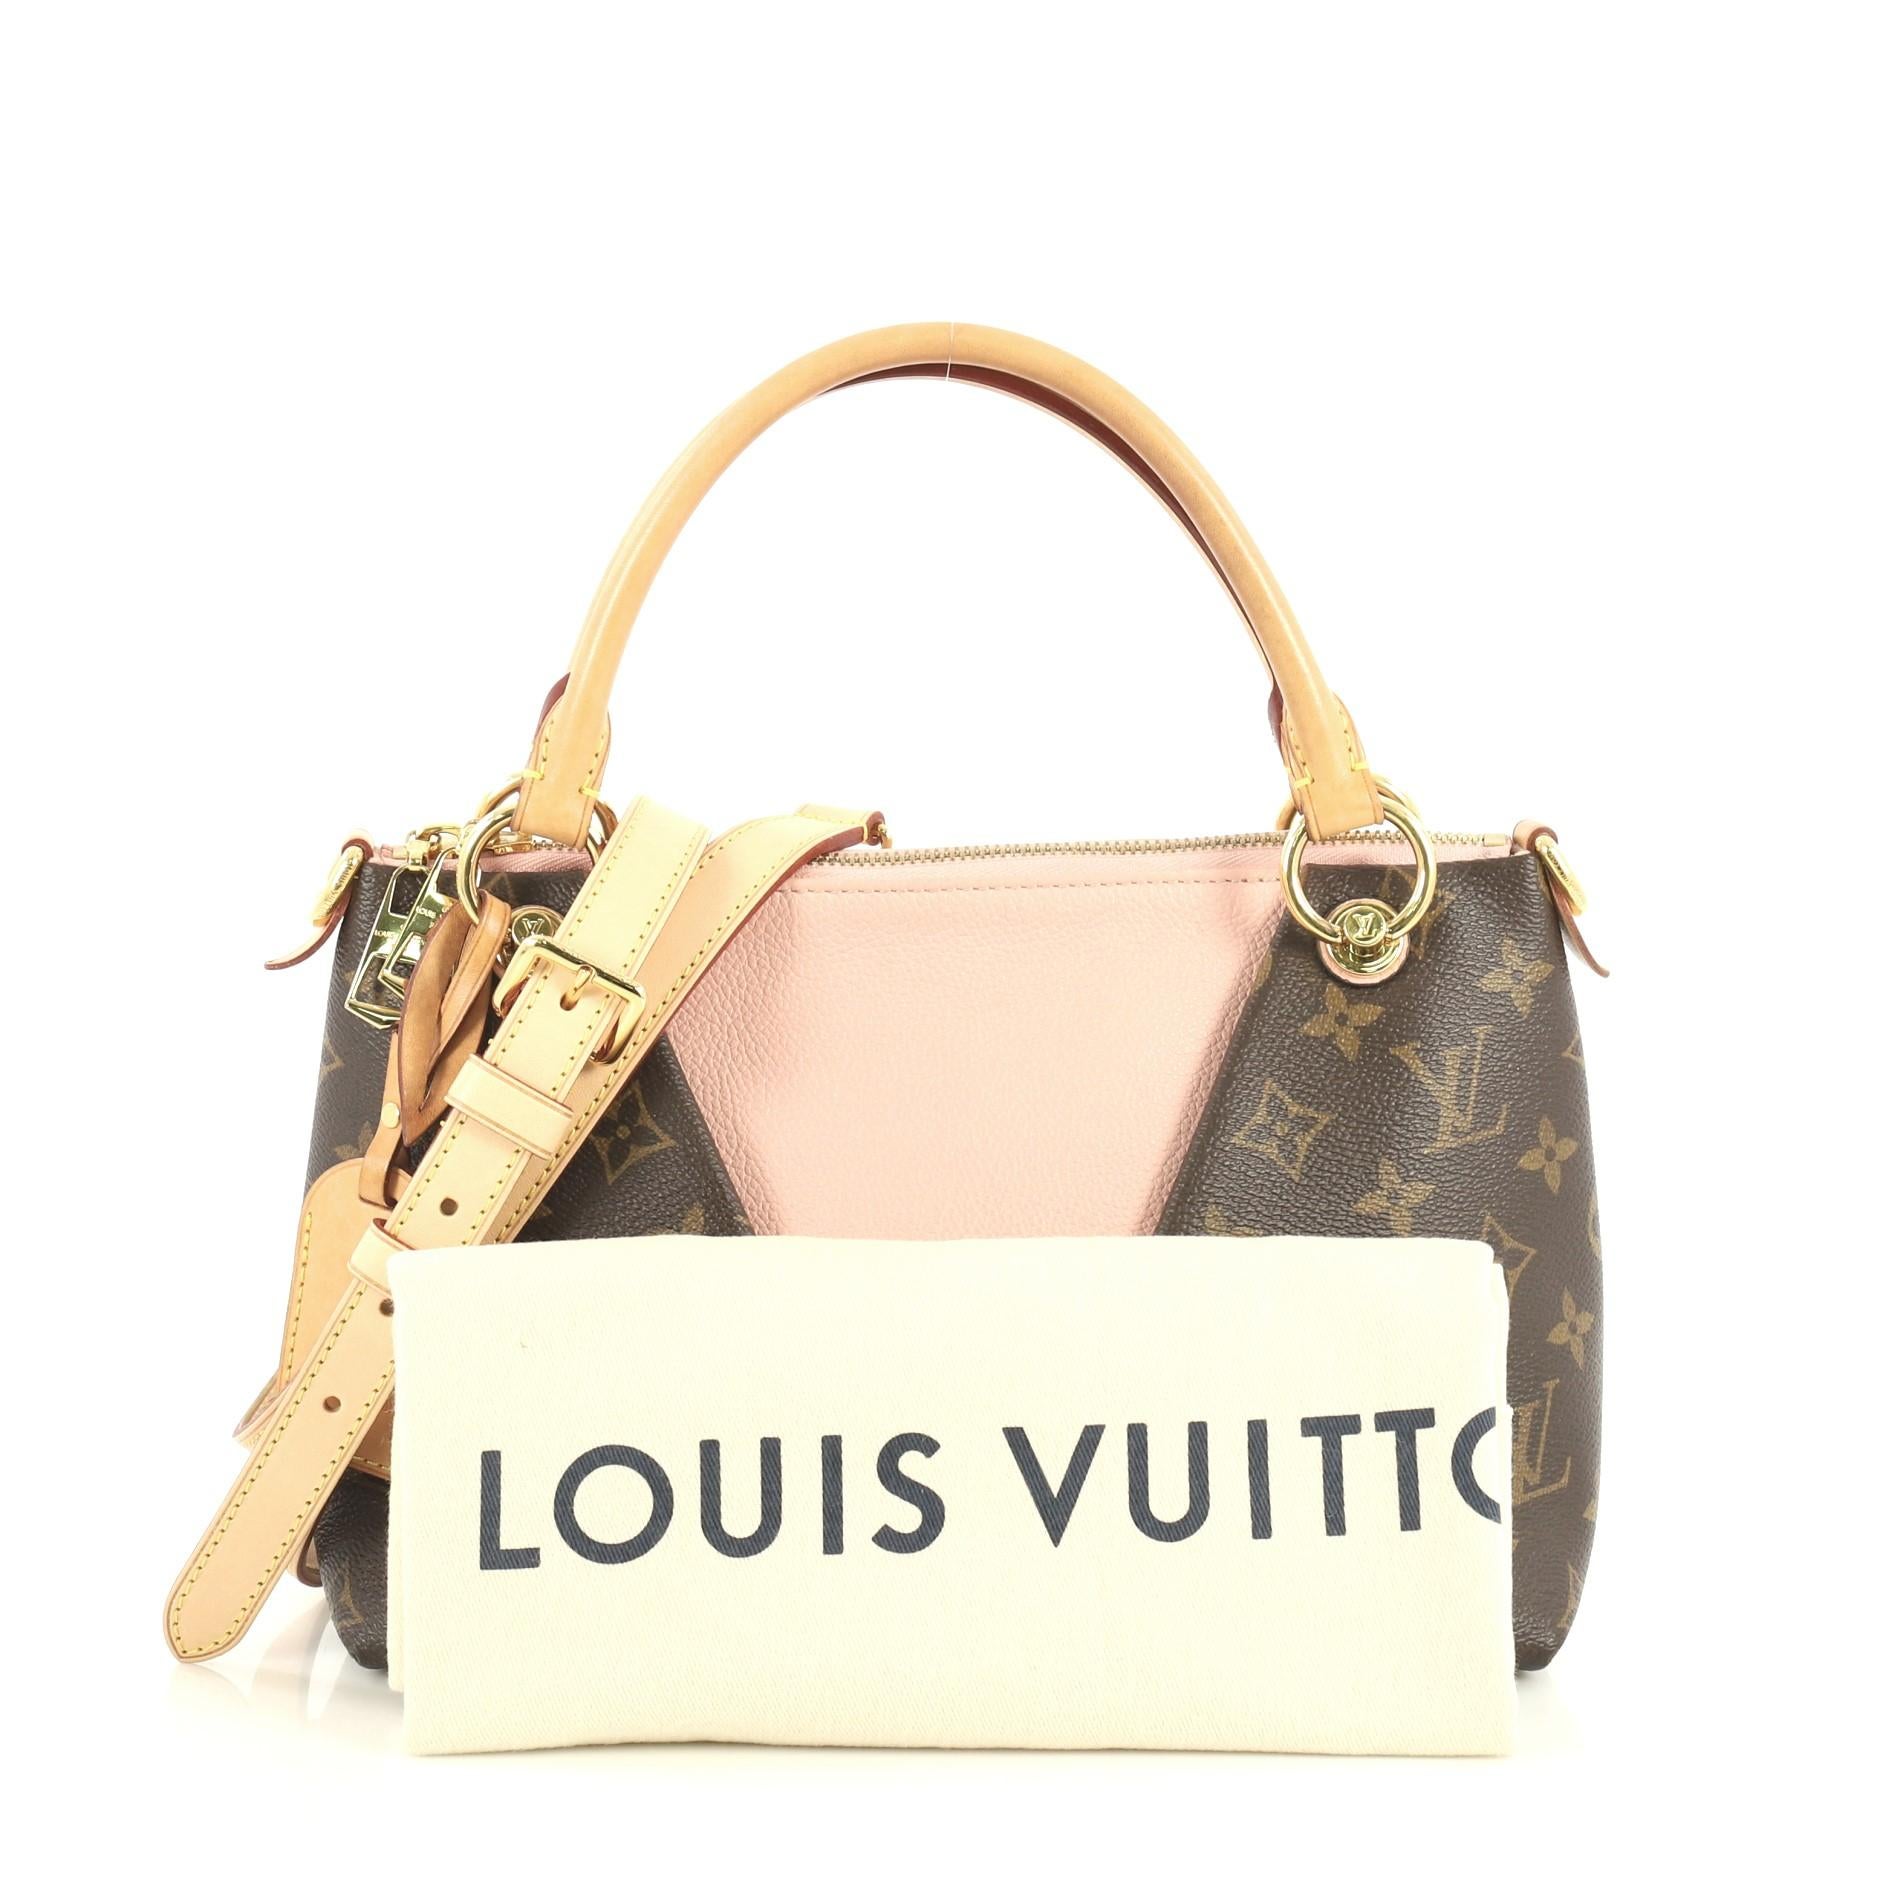 This Louis Vuitton V Tote Monogram Canvas and Leather BB, crafted from brown monogram coated canvas and pink leather, features dual rolled handles and gold-tone hardware. Its zip closure opens to a pink microfiber interior with slip pockets.